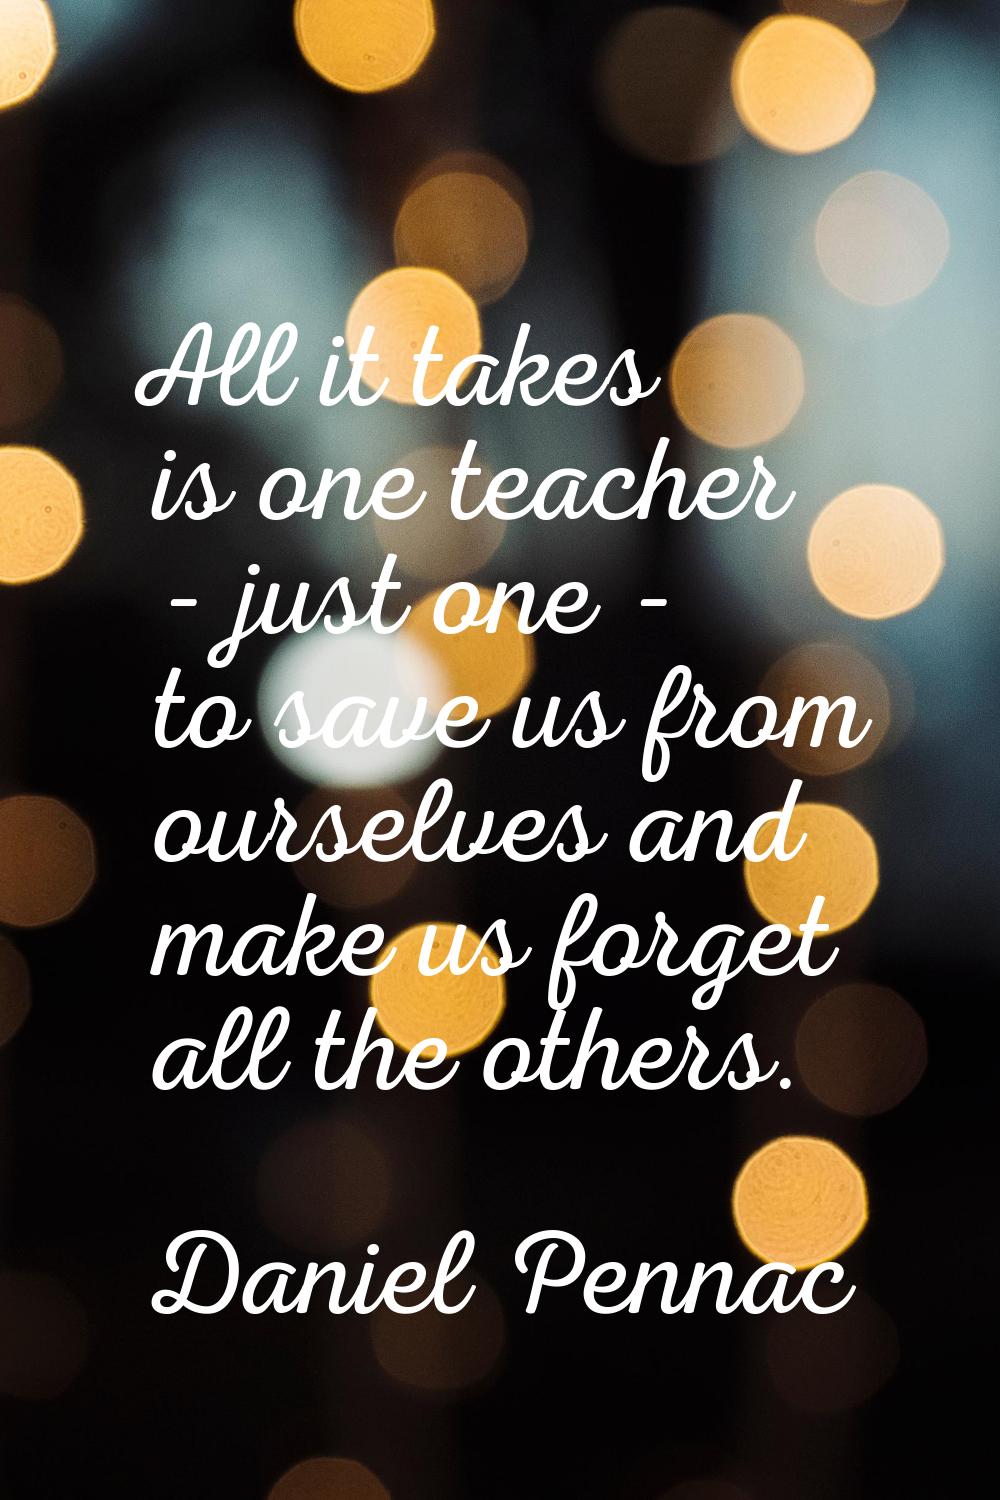 All it takes is one teacher - just one - to save us from ourselves and make us forget all the other